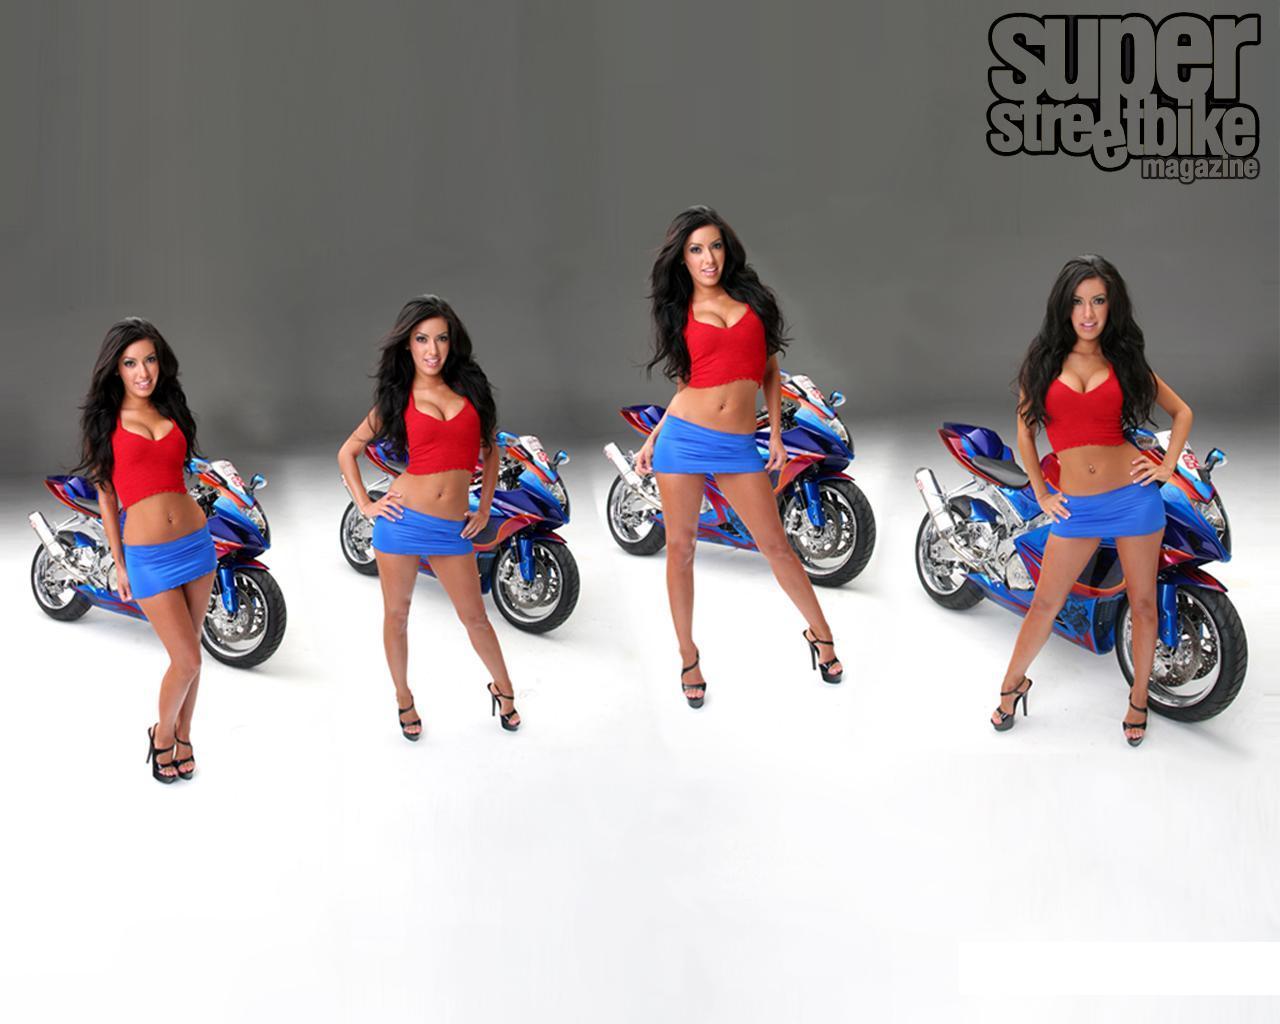 HOT & SEXY MOTORCYCLE BABES